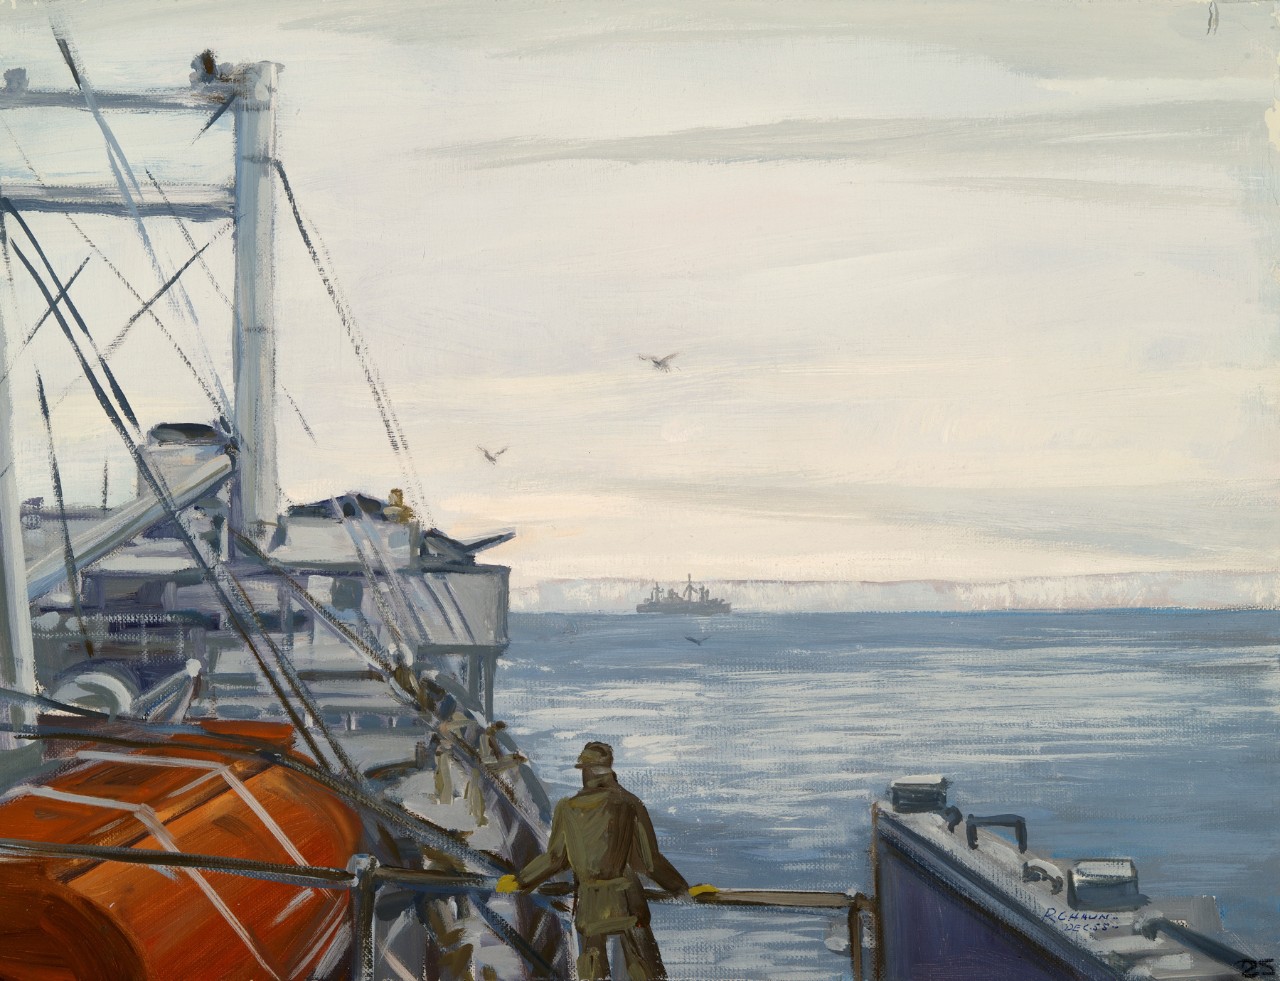 A sailor stands on the deck of a ship looking at another ship passing in front of the ice self